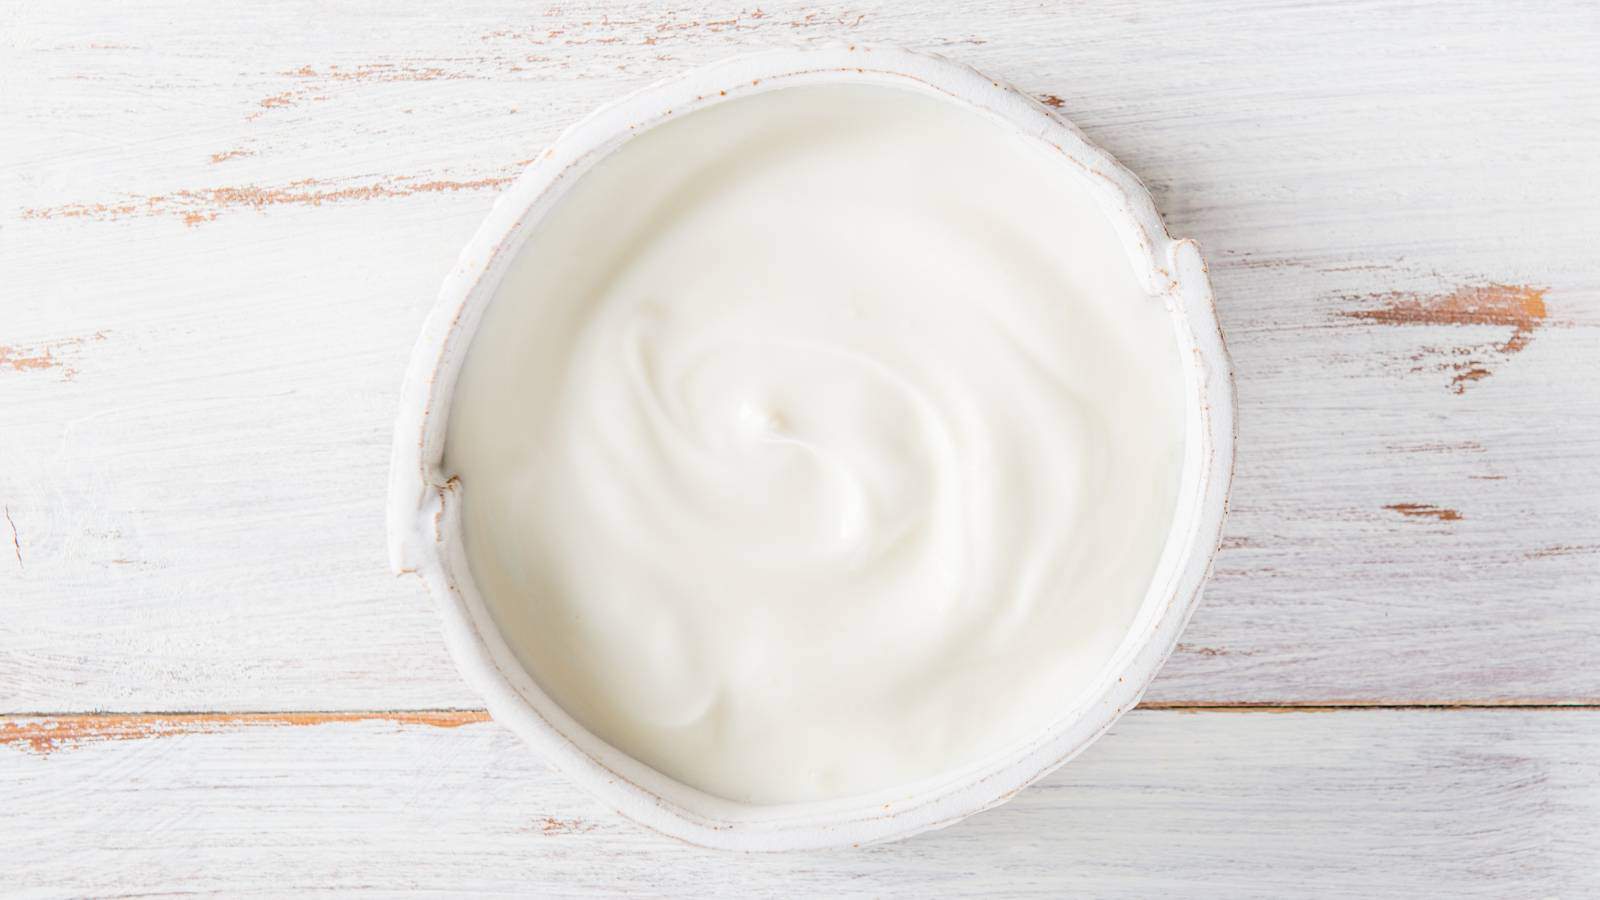 A picture of homemade yogurt in bowl on while wood background.